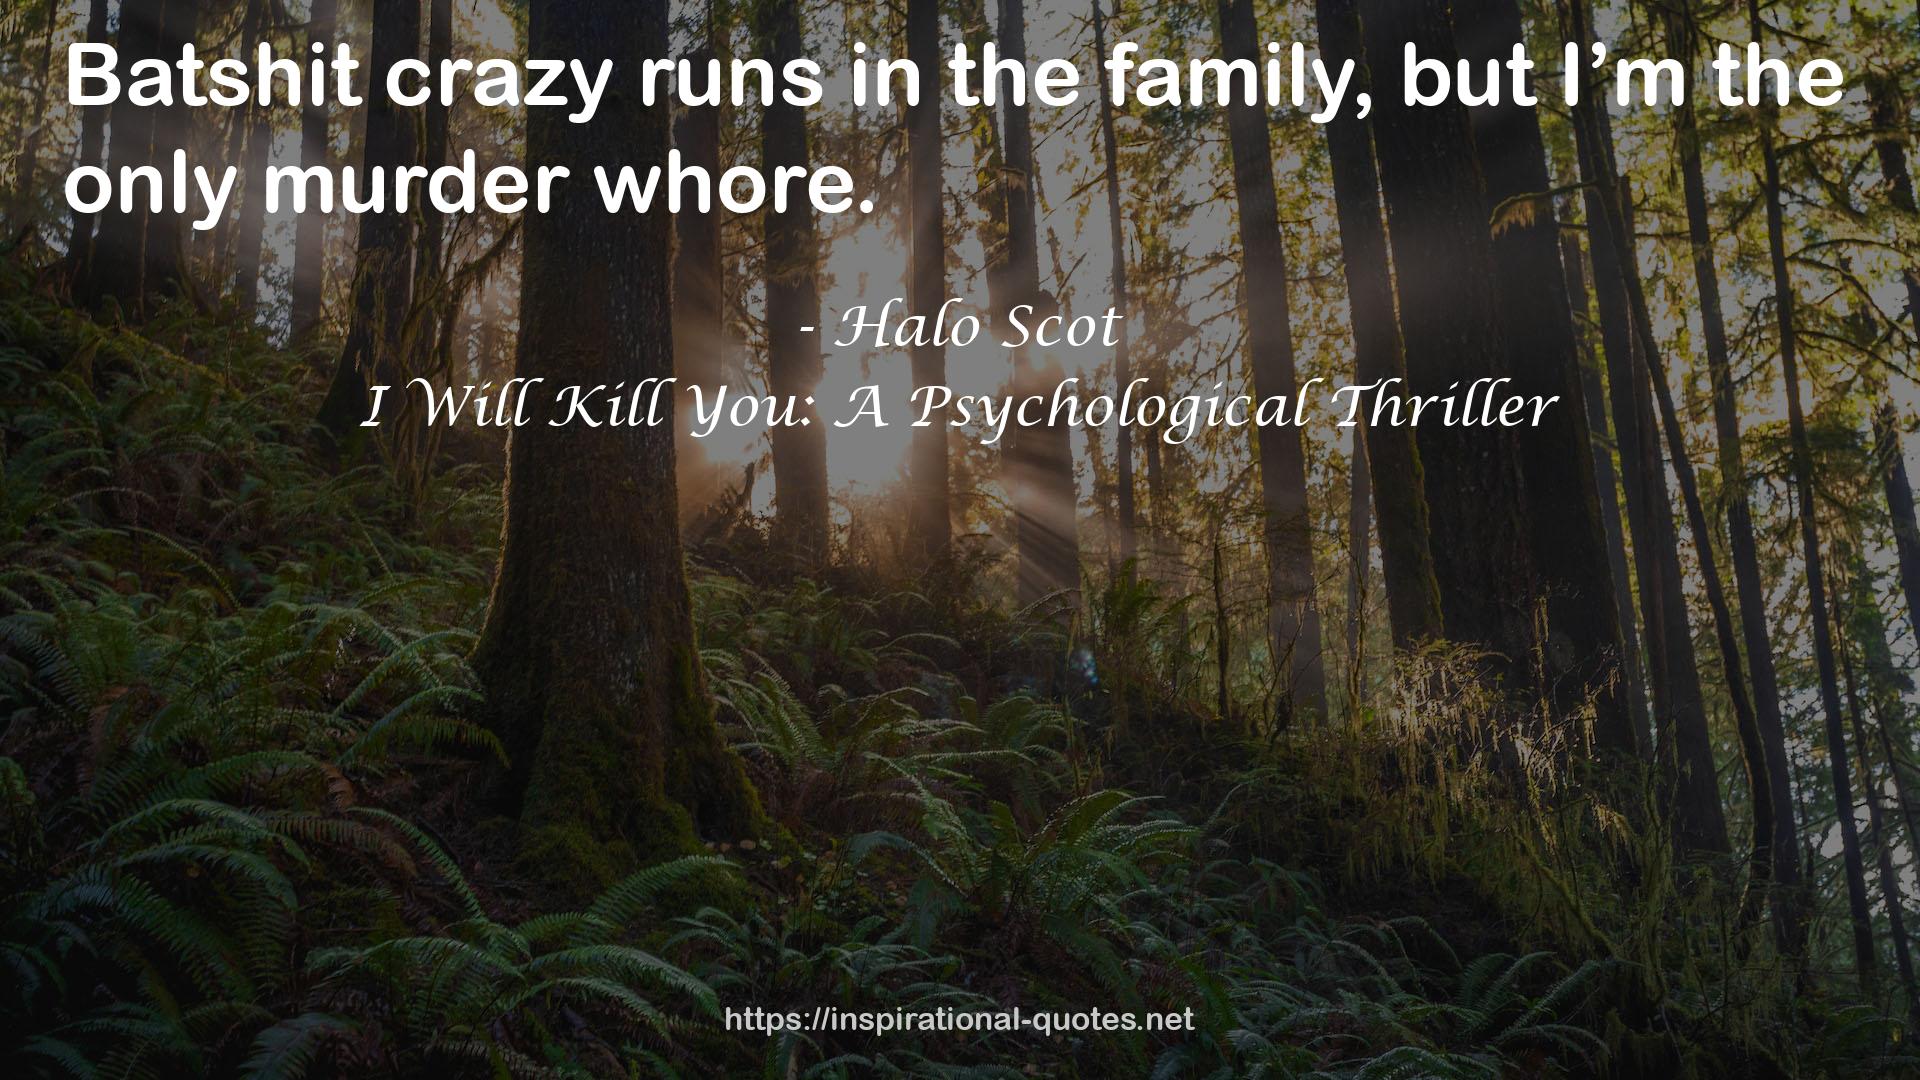 I Will Kill You: A Psychological Thriller QUOTES